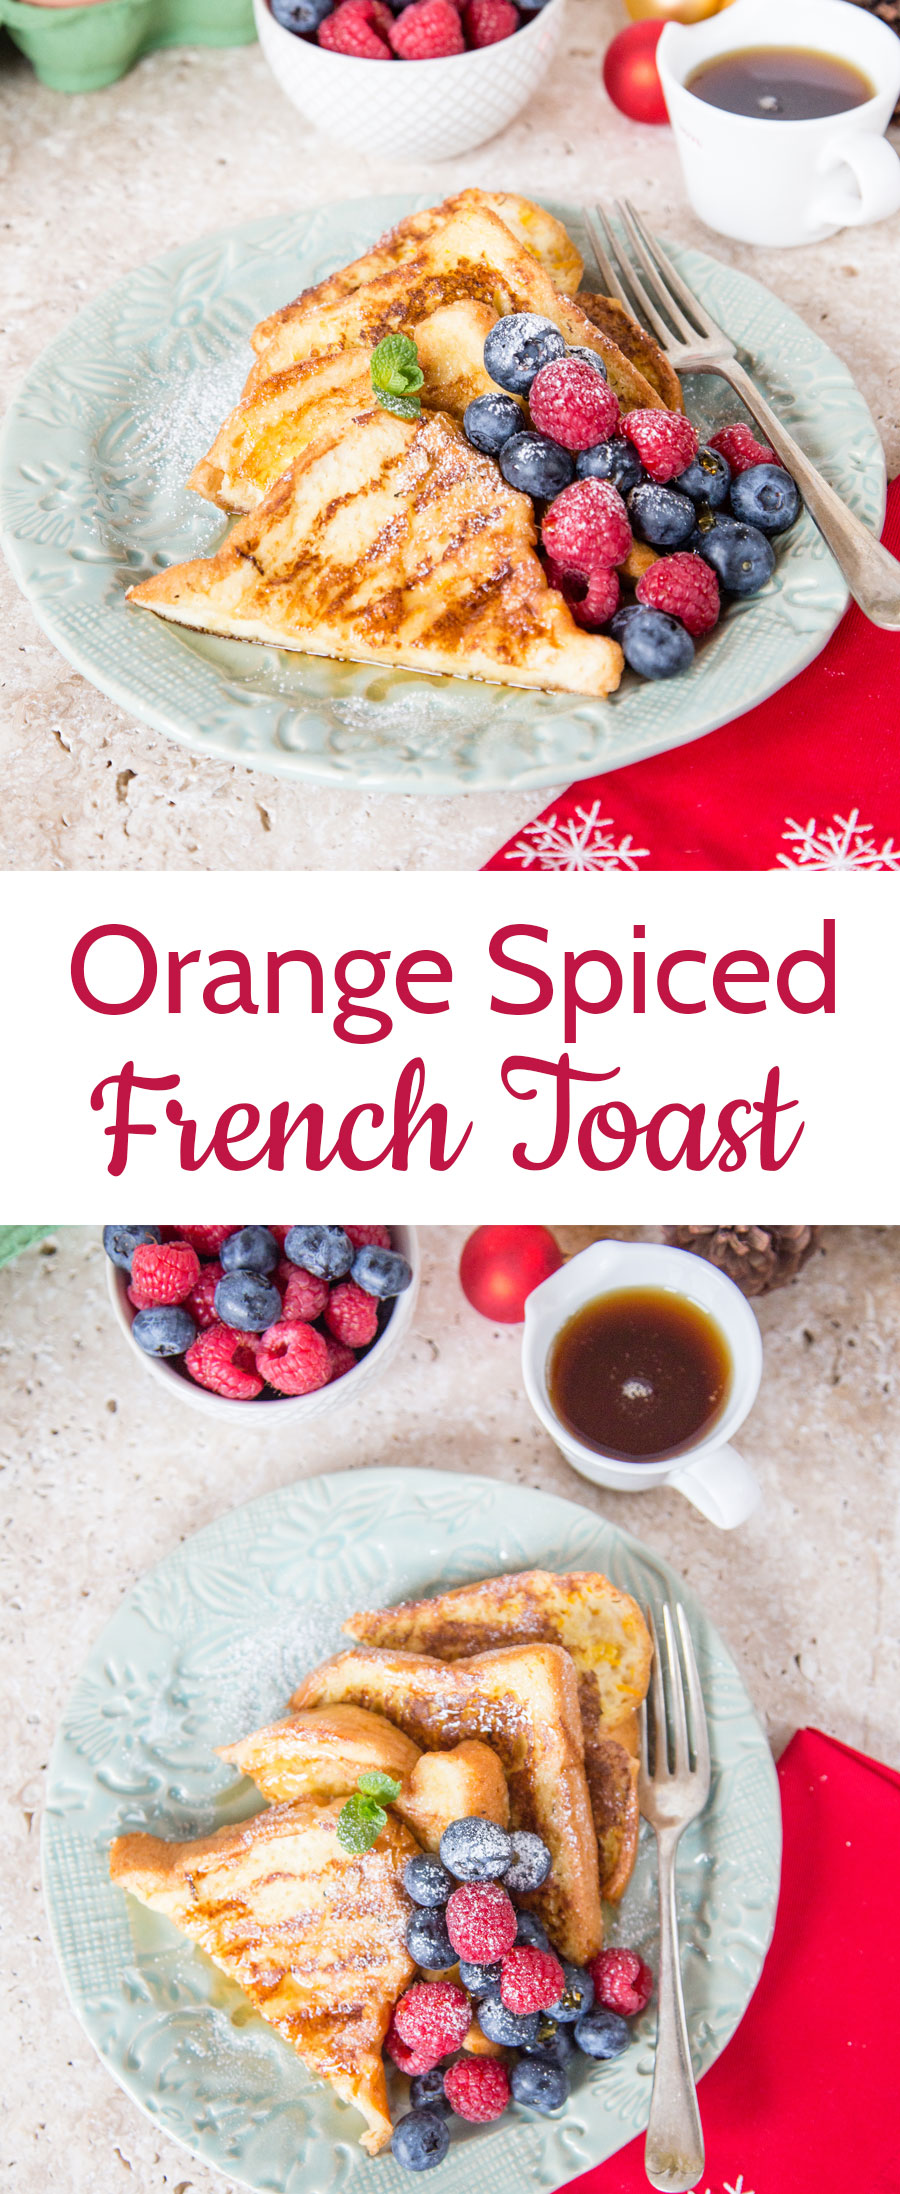 This lightly spiced French toast is flavoured with orange and is perfect for a festive brunch